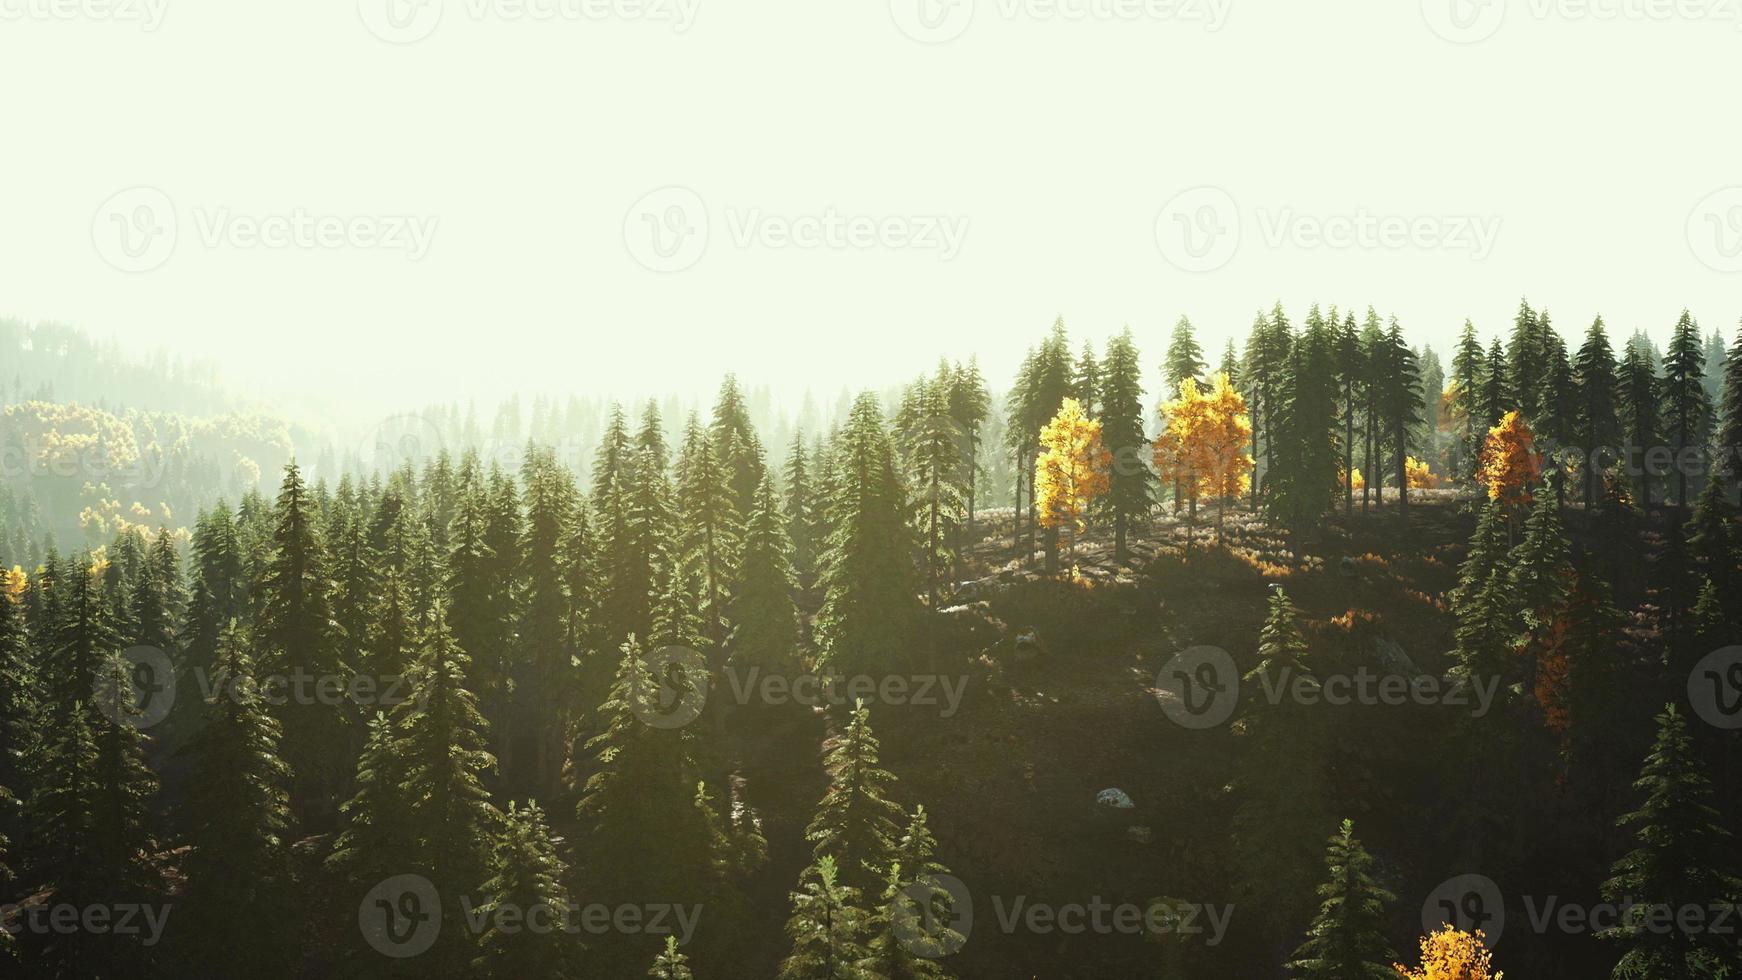 fir trees on meadow between hillsides with conifer forest in fog photo